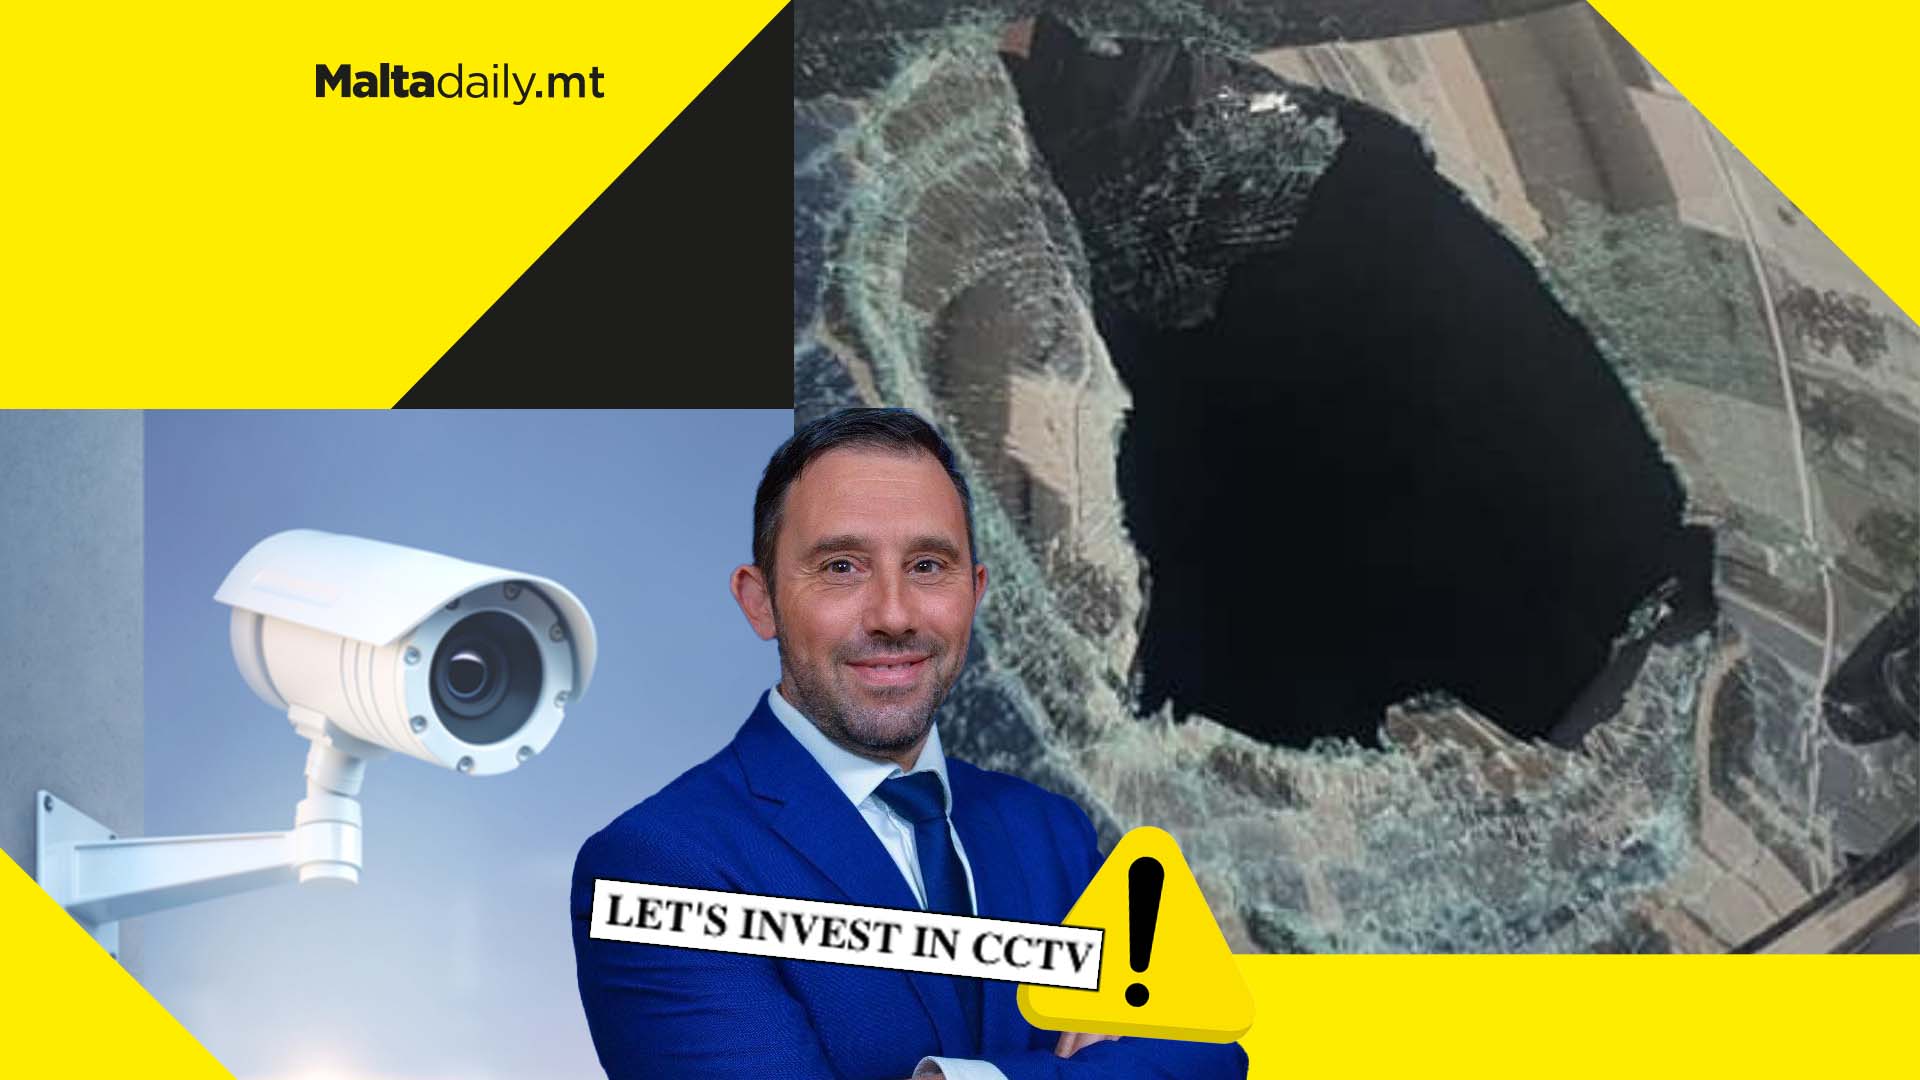 Install wide CCTV coverage in St Paul’s Bay says PN MP